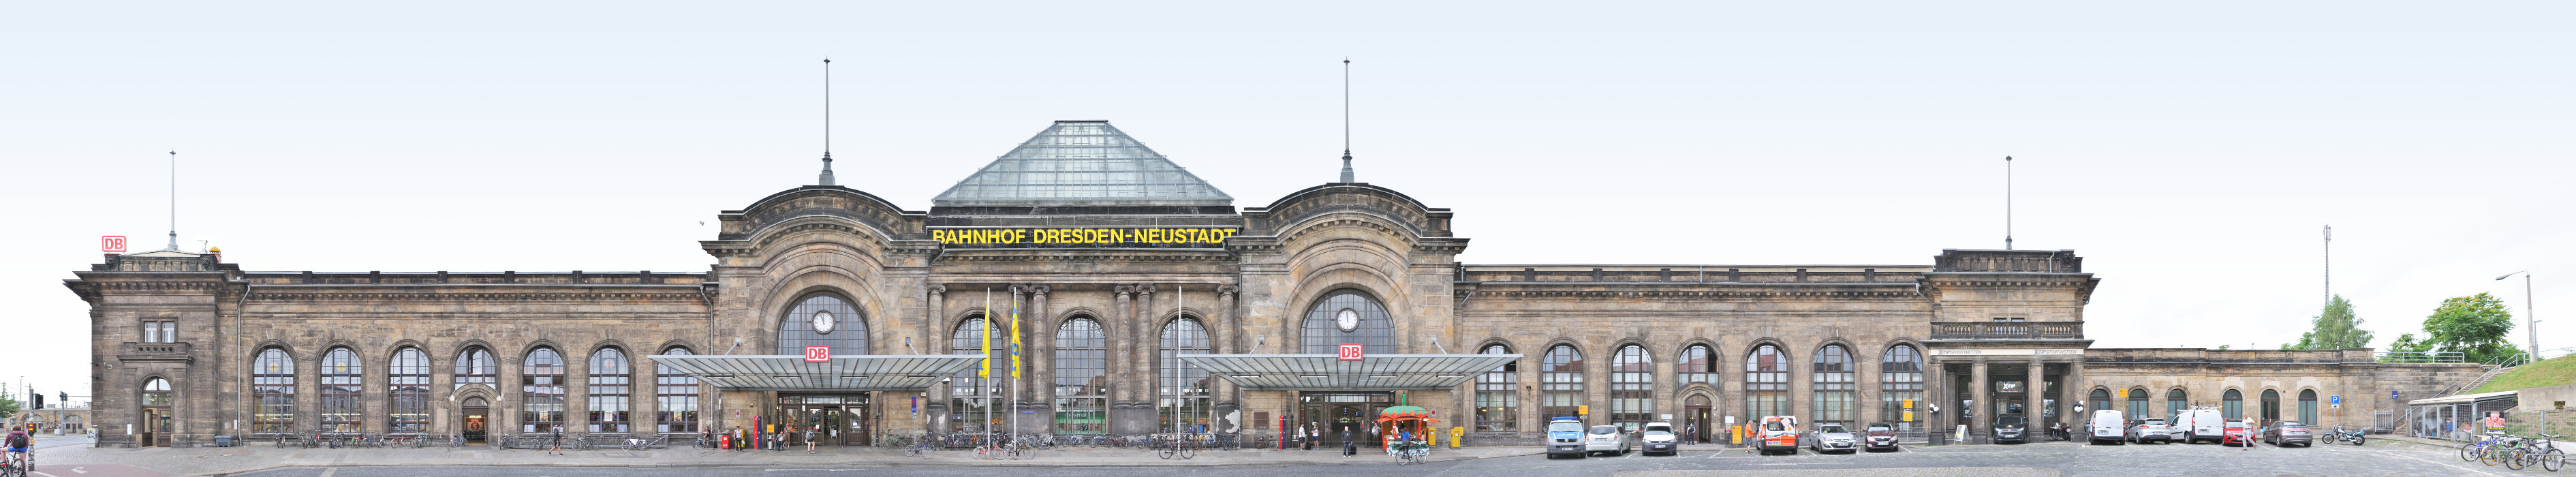 train station Dresden Neustadt in Saxony Facade and Architecture